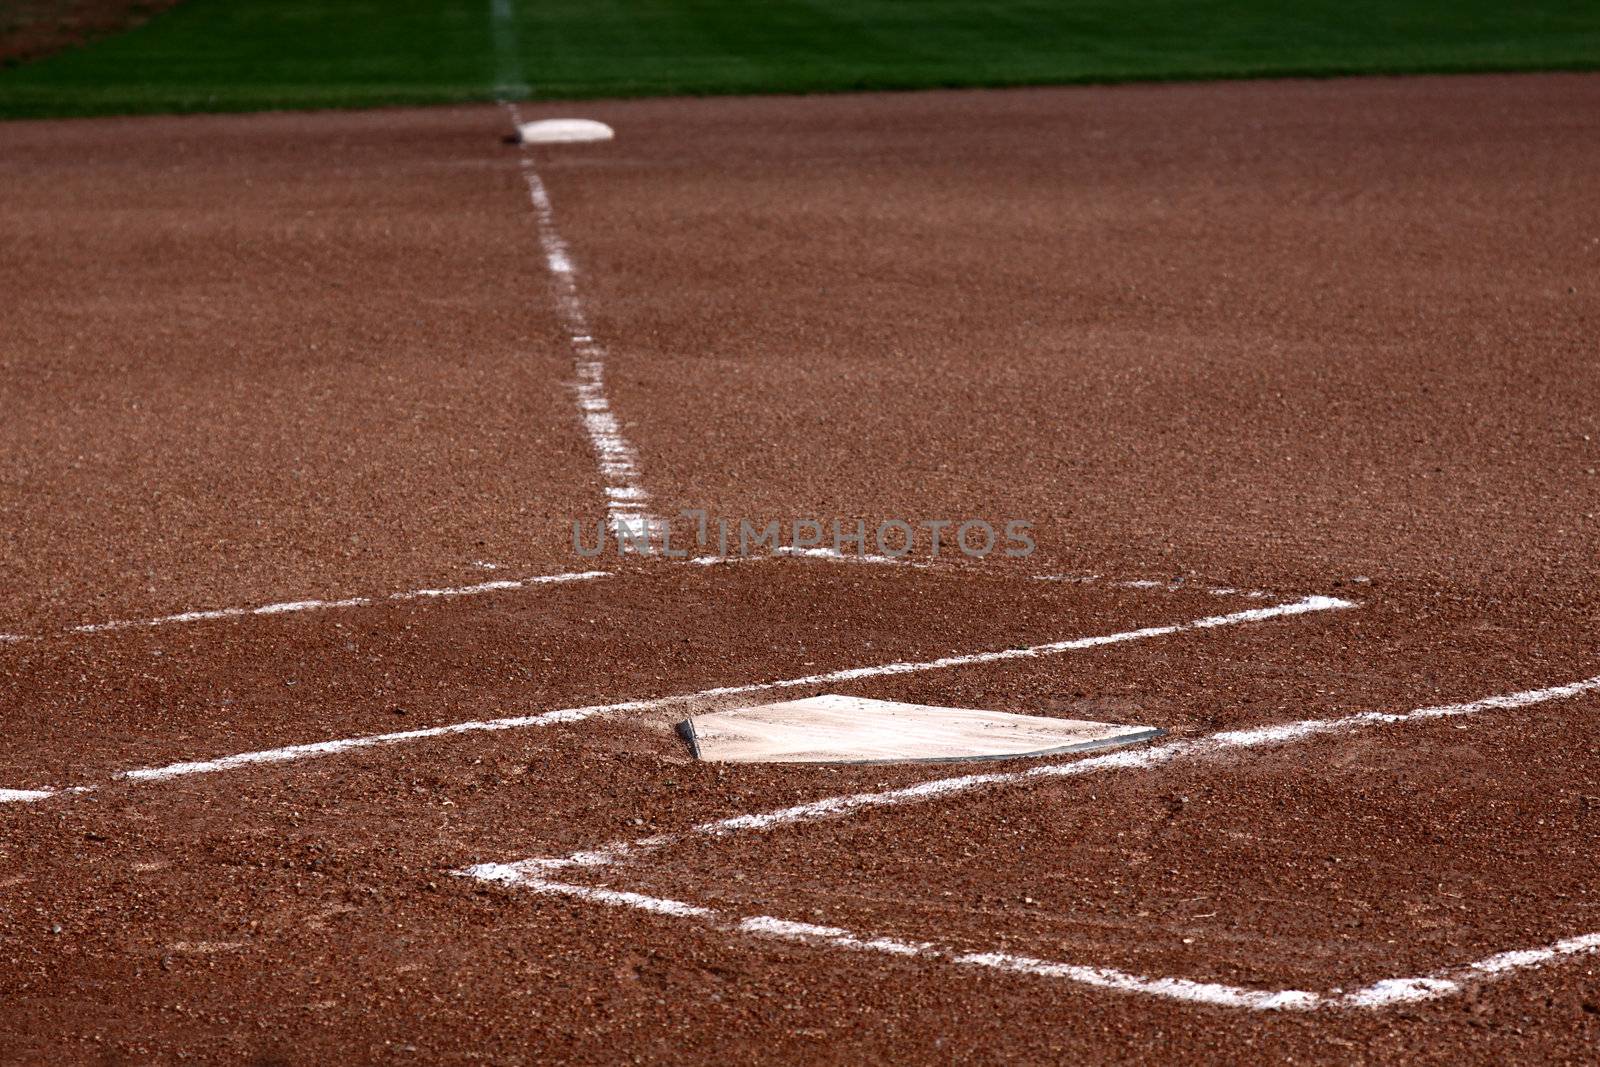 The view down the left field line with home plate and the batters boxes in focus.